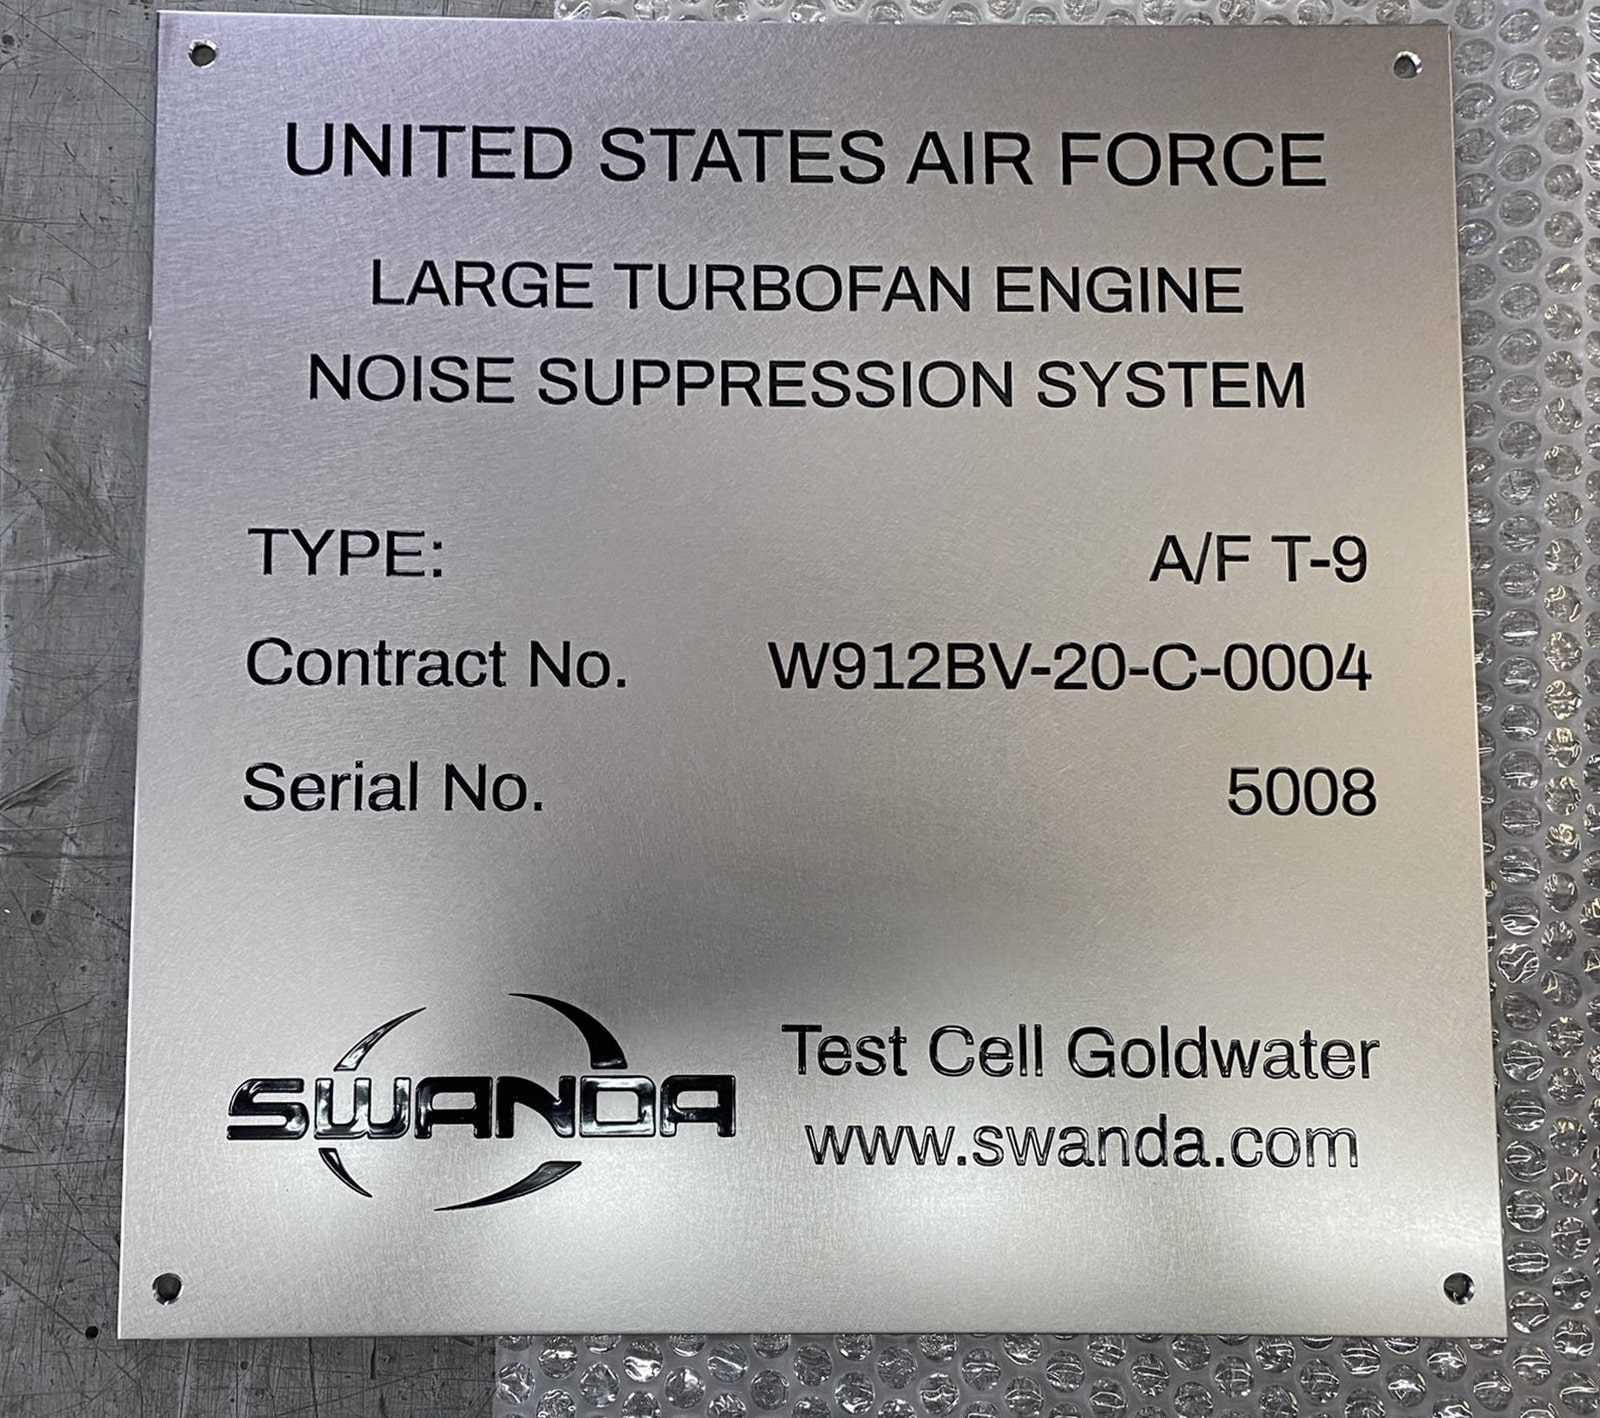 Military air force industrial metal plaque stainless steel - Military air force industrial metal plaque stainless steel